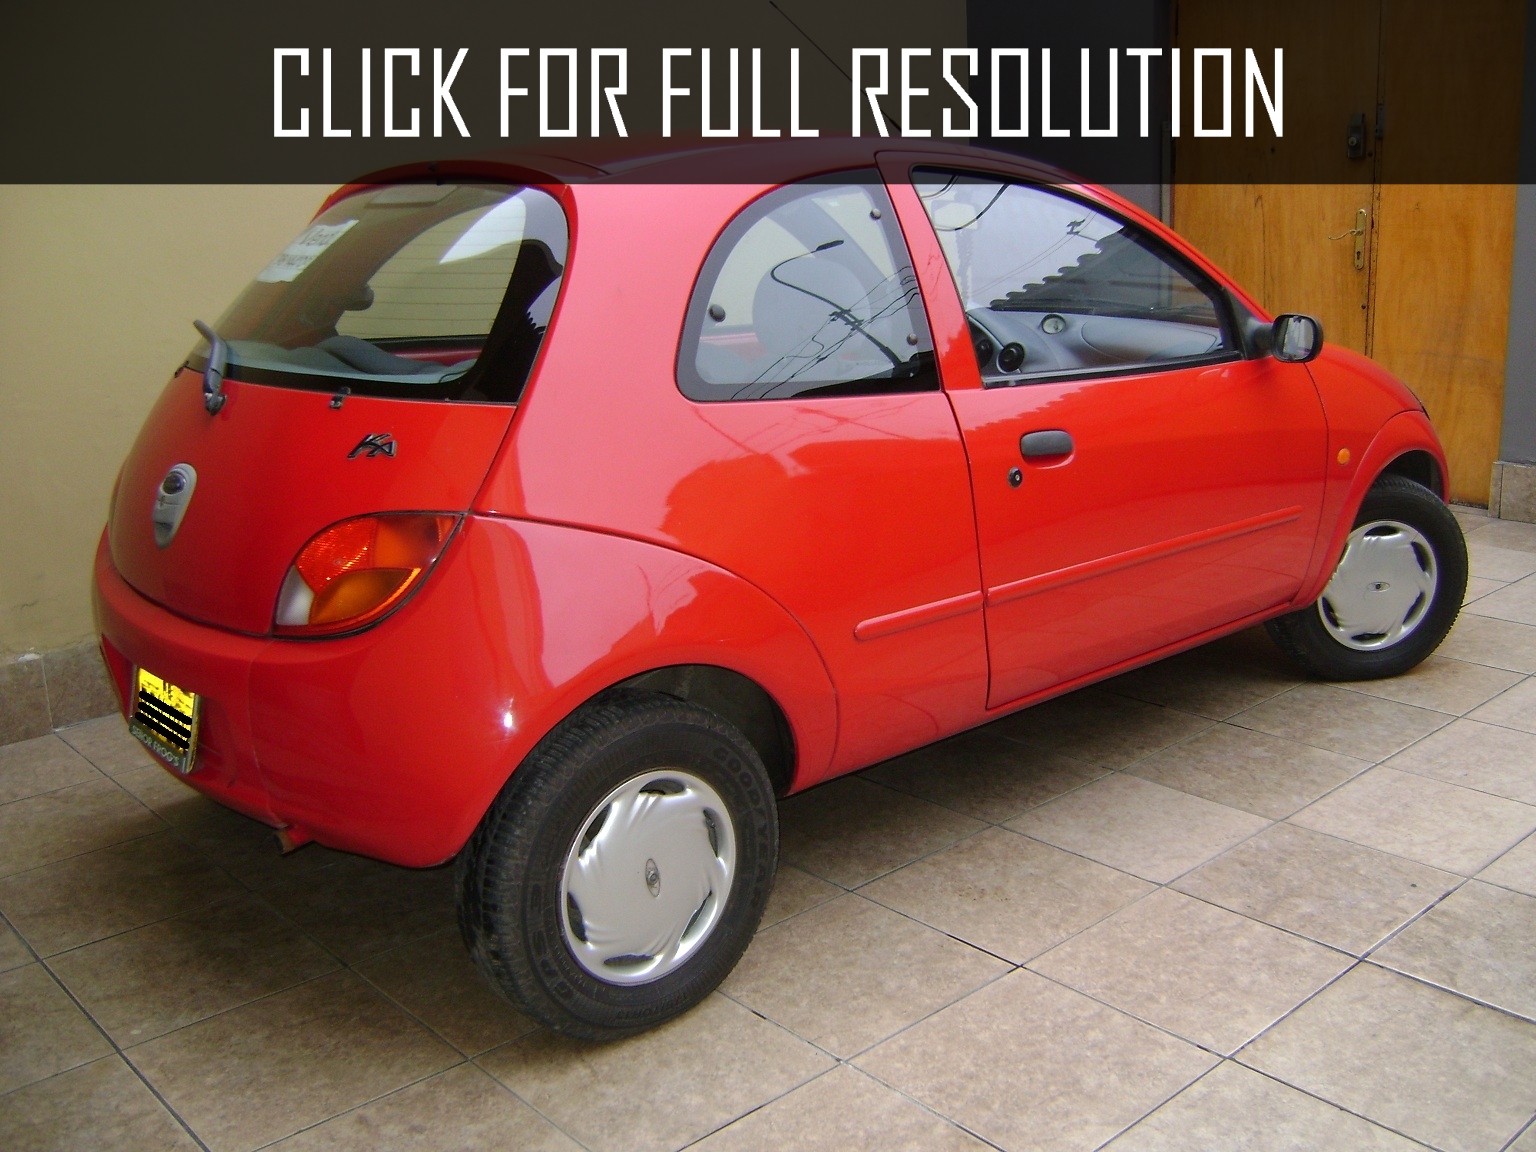 1998 Ford Ka news, reviews, msrp, ratings with amazing